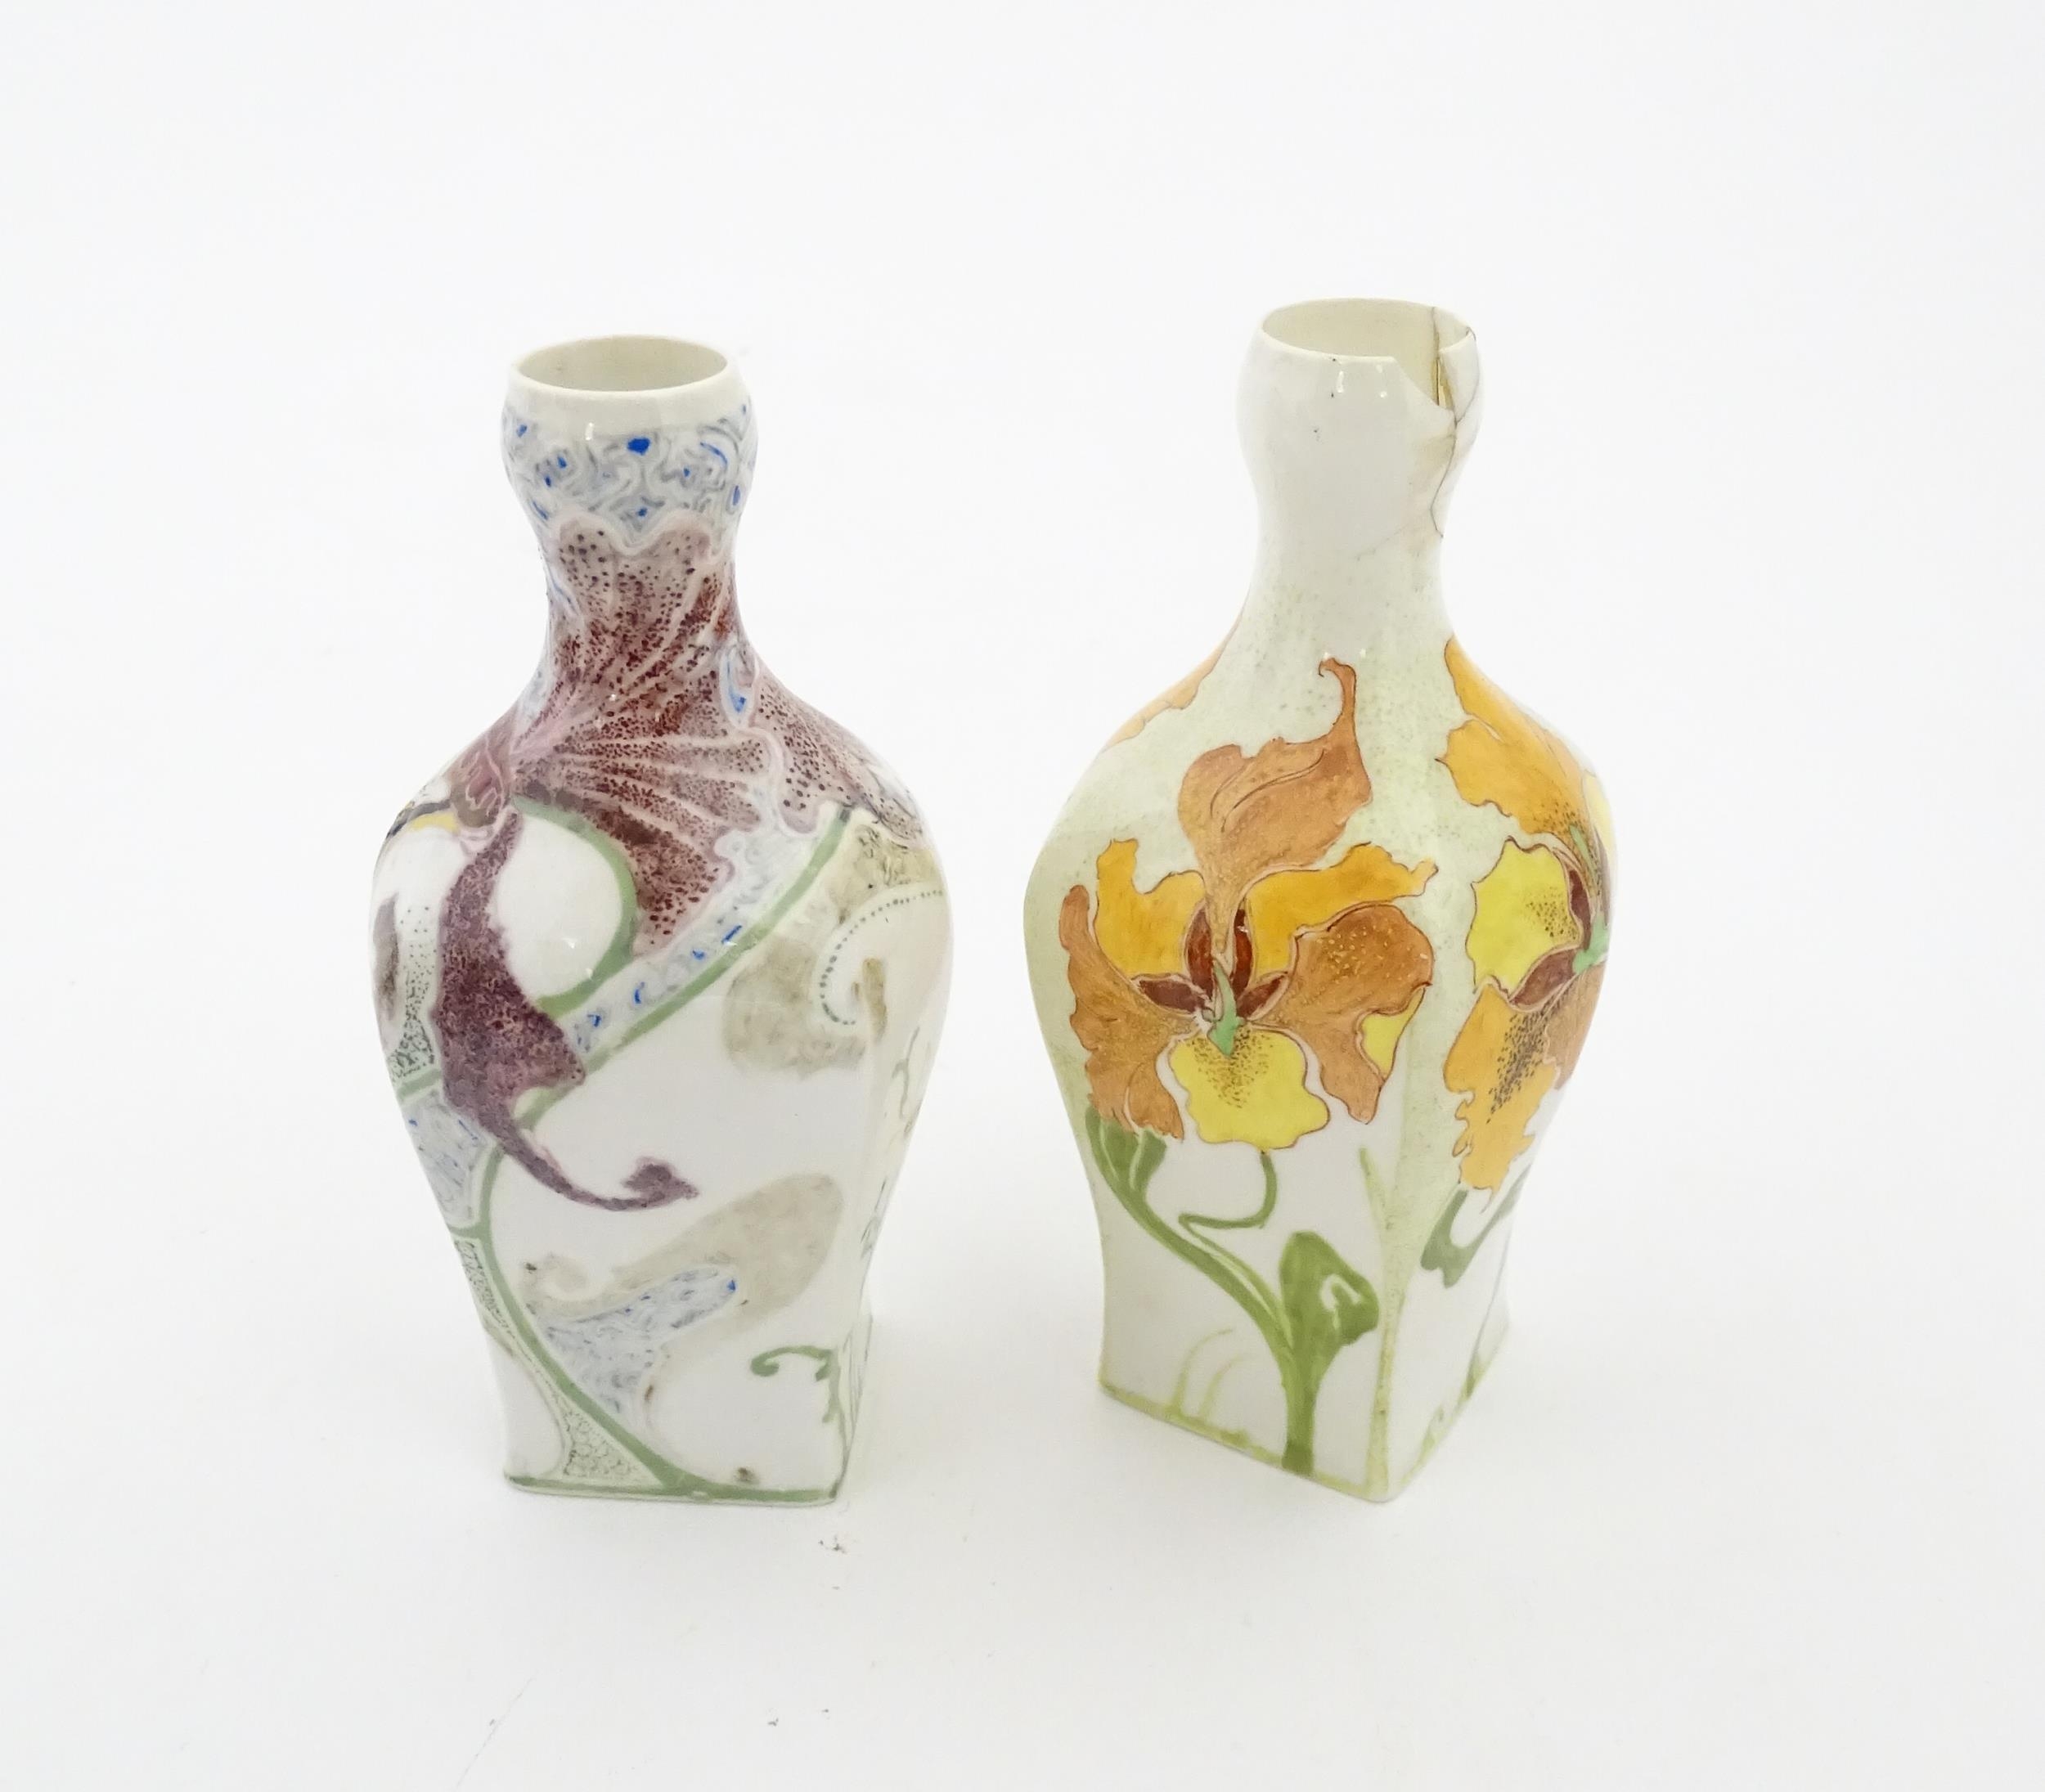 Two Rozenburg eggshell porcelain vases, one decorated with purple flowers, the other with orange - Image 6 of 8